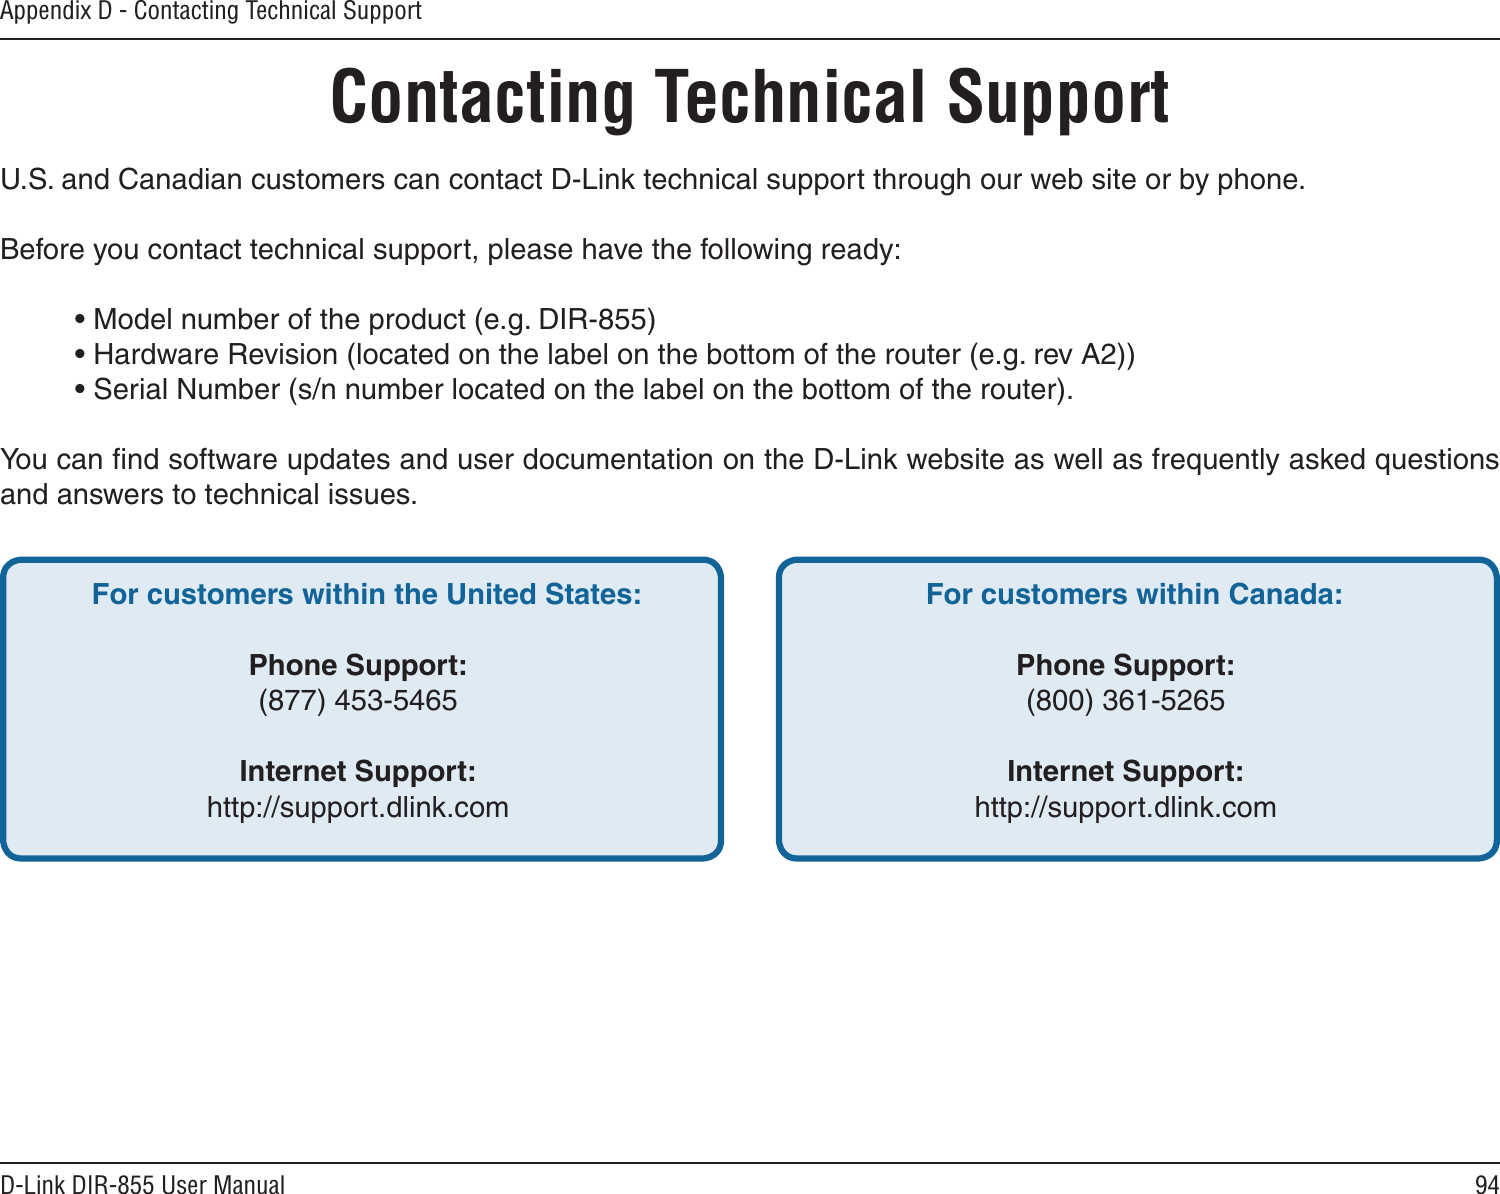 94D-Link DIR-855 User ManualAppendix D - Contacting Technical SupportContacting Technical SupportU.S. and Canadian customers can contact D-Link technical support through our web site or by phone.Before you contact technical support, please have the following ready:  • Model number of the product (e.g. DIR-855)  • Hardware Revision (located on the label on the bottom of the router (e.g. rev A2))  • Serial Number (s/n number located on the label on the bottom of the router). You can ﬁnd software updates and user documentation on the D-Link website as well as frequently asked questions and answers to technical issues.For customers within the United States: Phone Support:(877) 453-5465Internet Support:http://support.dlink.com For customers within Canada: Phone Support:(800) 361-5265Internet Support:http://support.dlink.com 